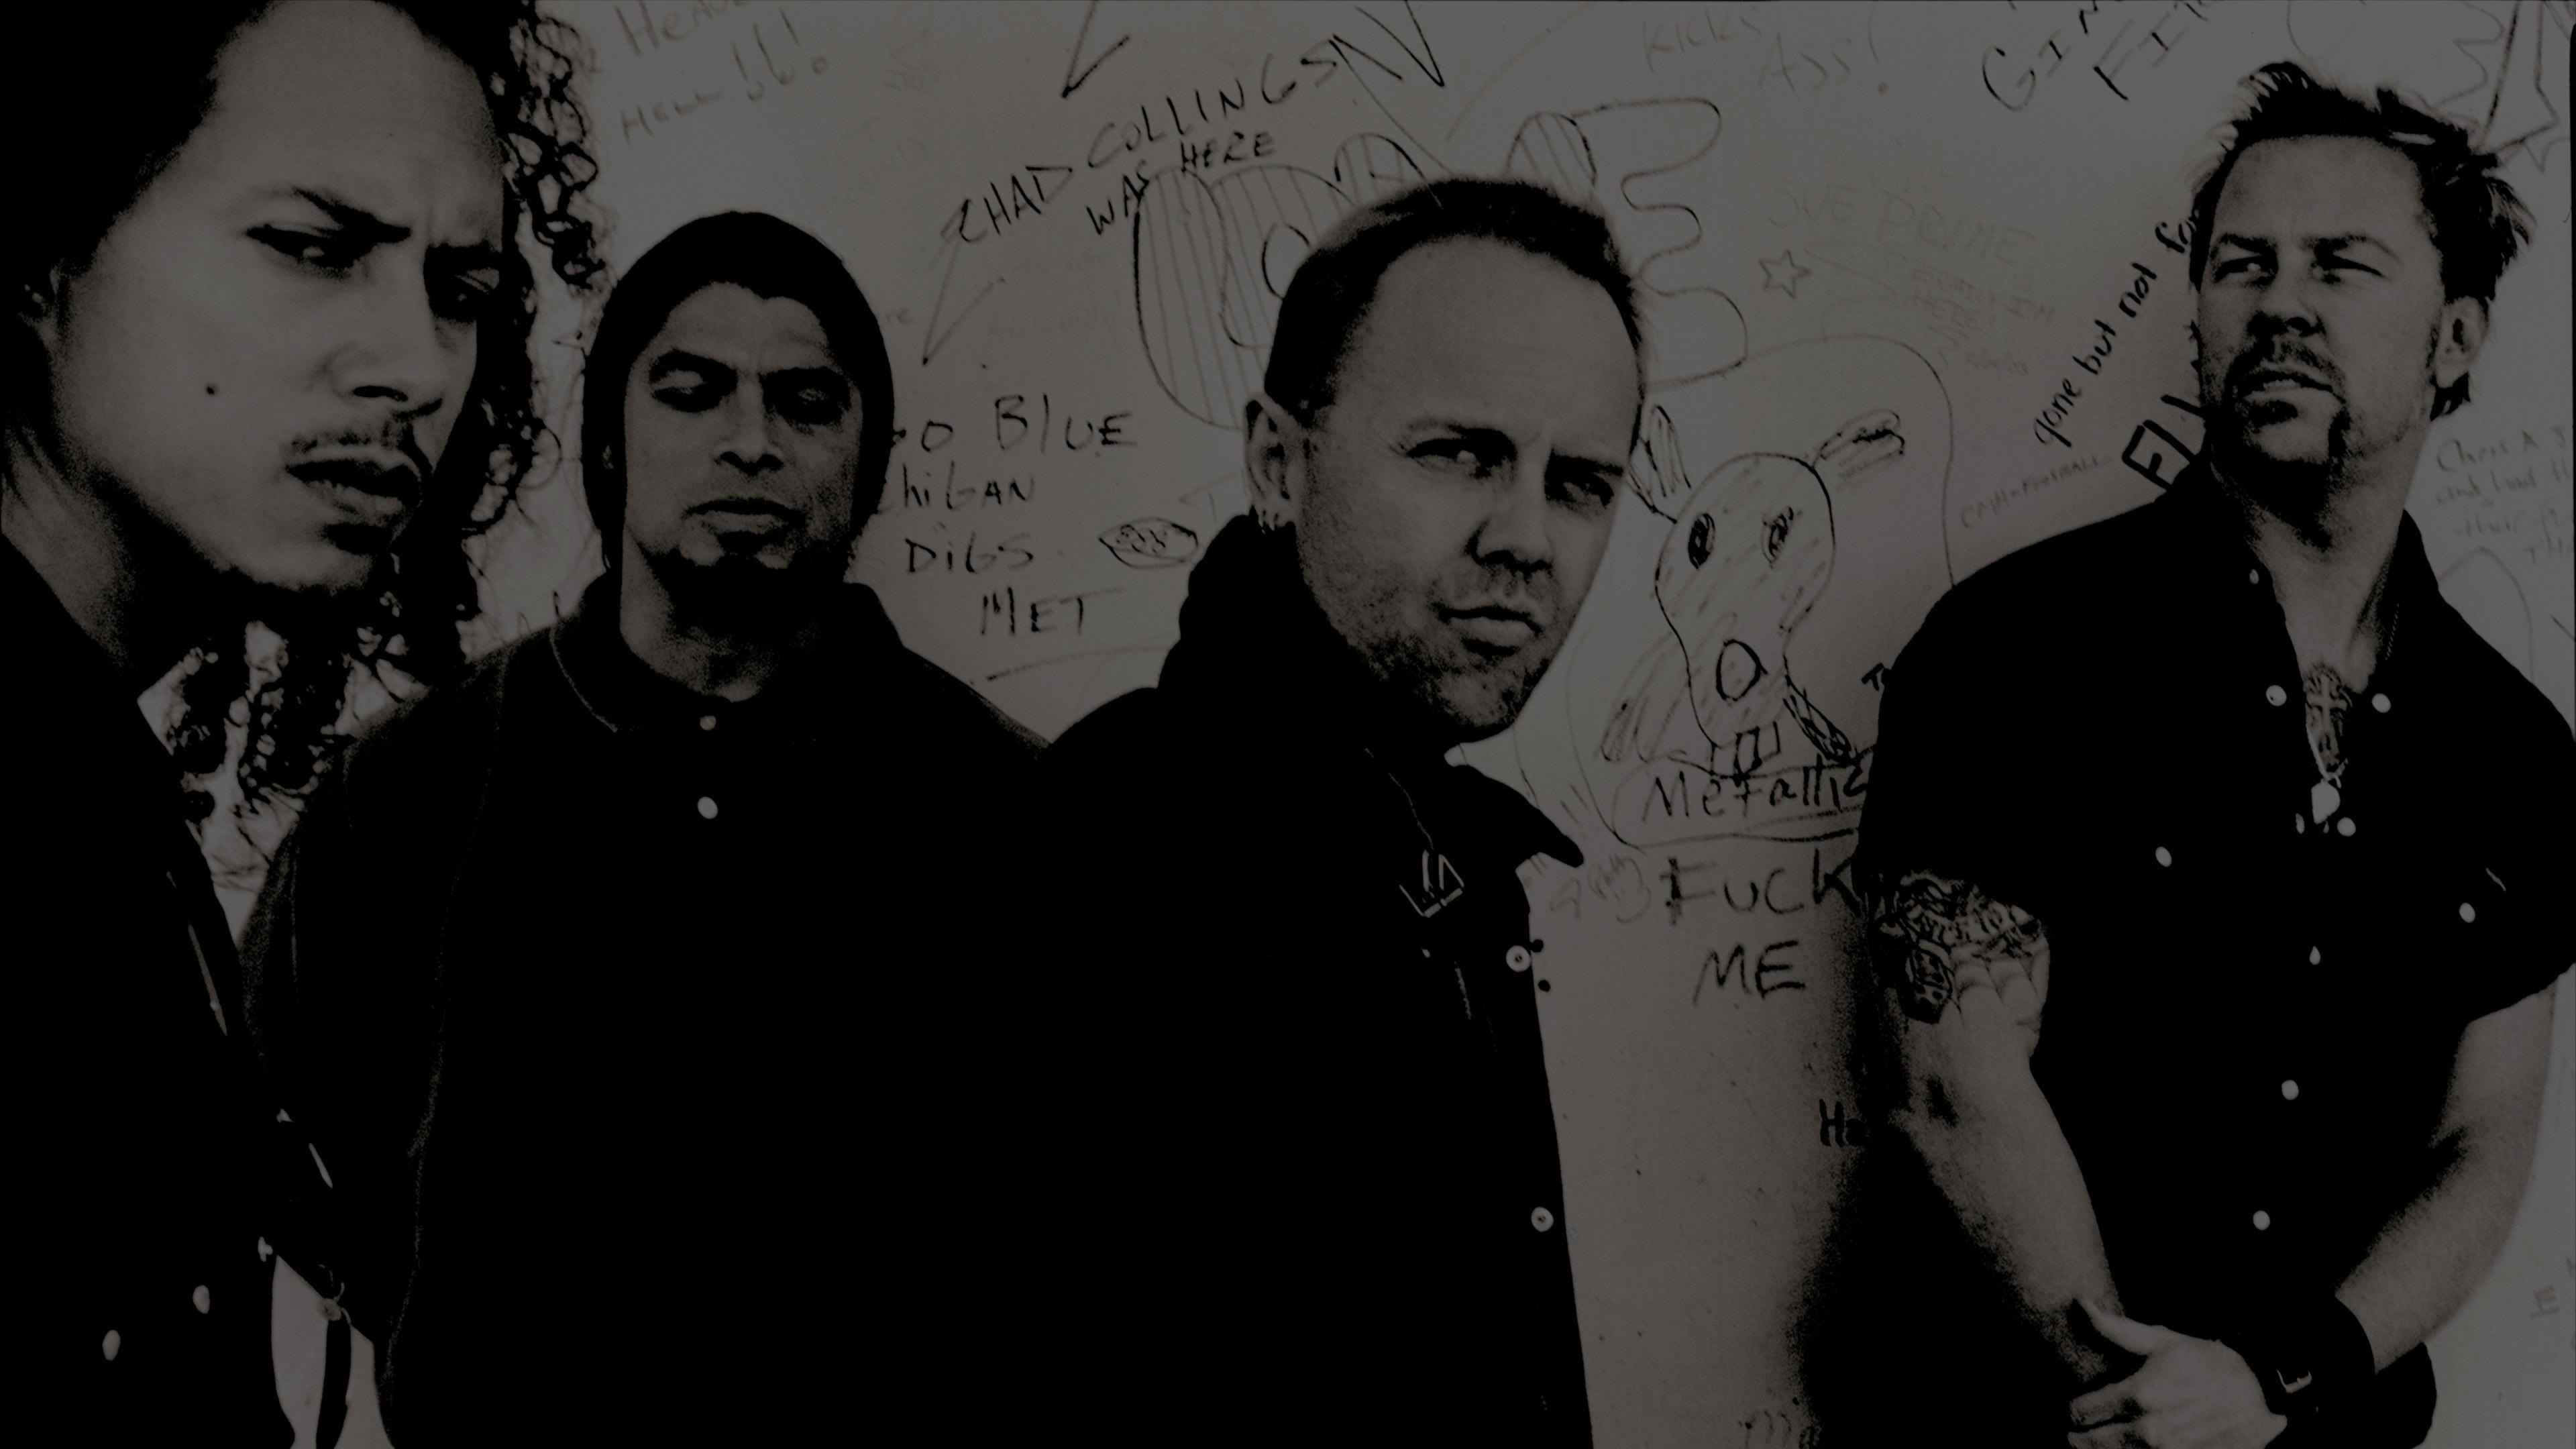 Banner Image for Metallica's Song "Frantic"